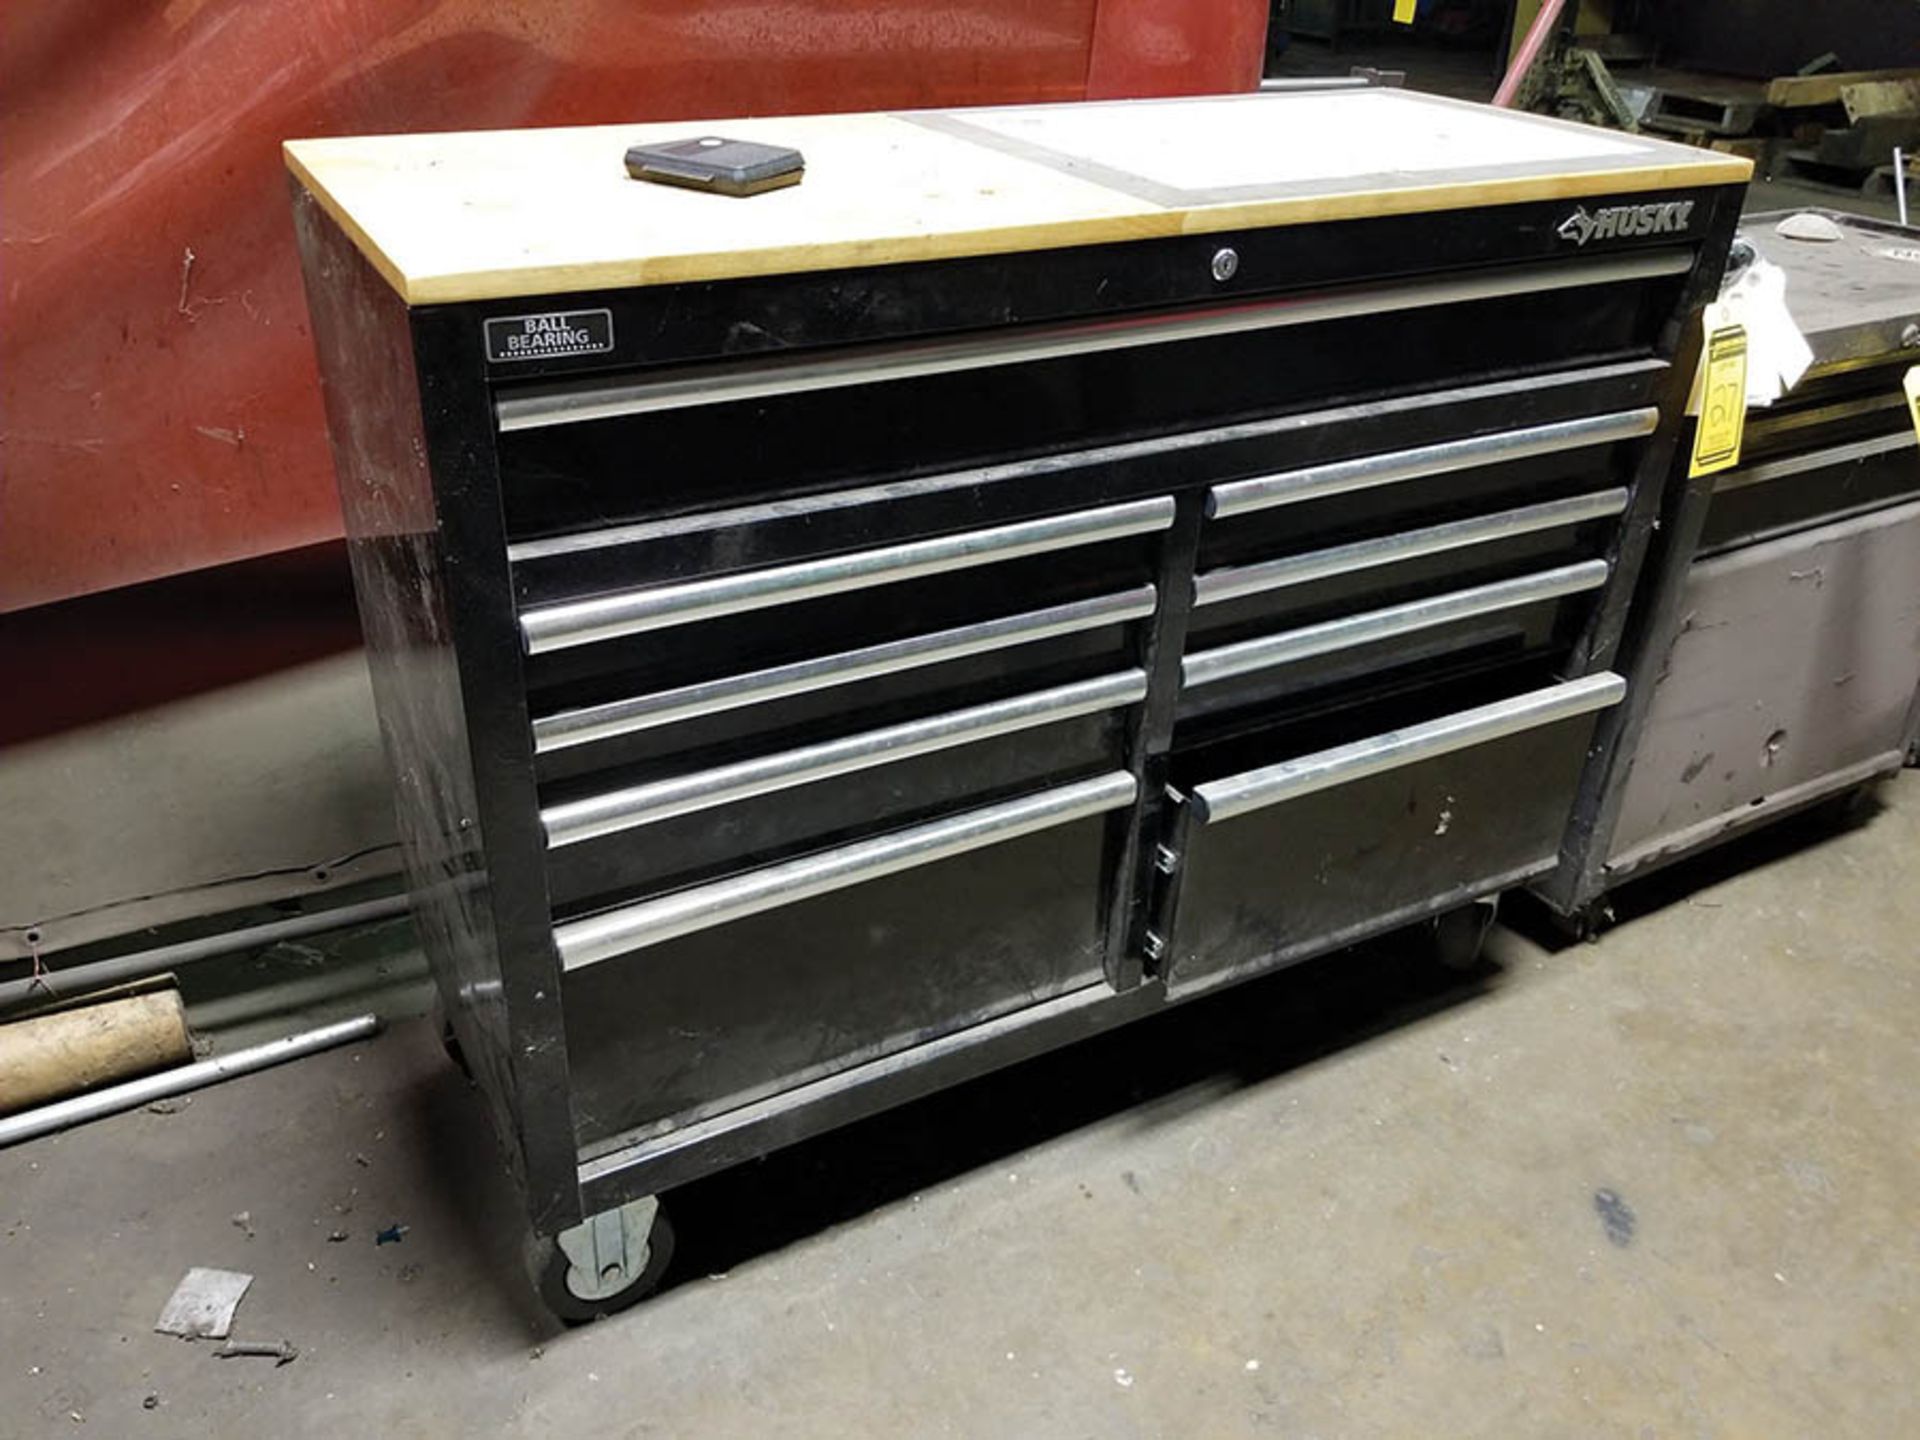 HUSKY 9 DRAWER ROLLING WORK BENCH TOOL CABINETS WITH TOOLS; HAMMERS, SCREWDRIVERS, WRENCHES, GLOVES,